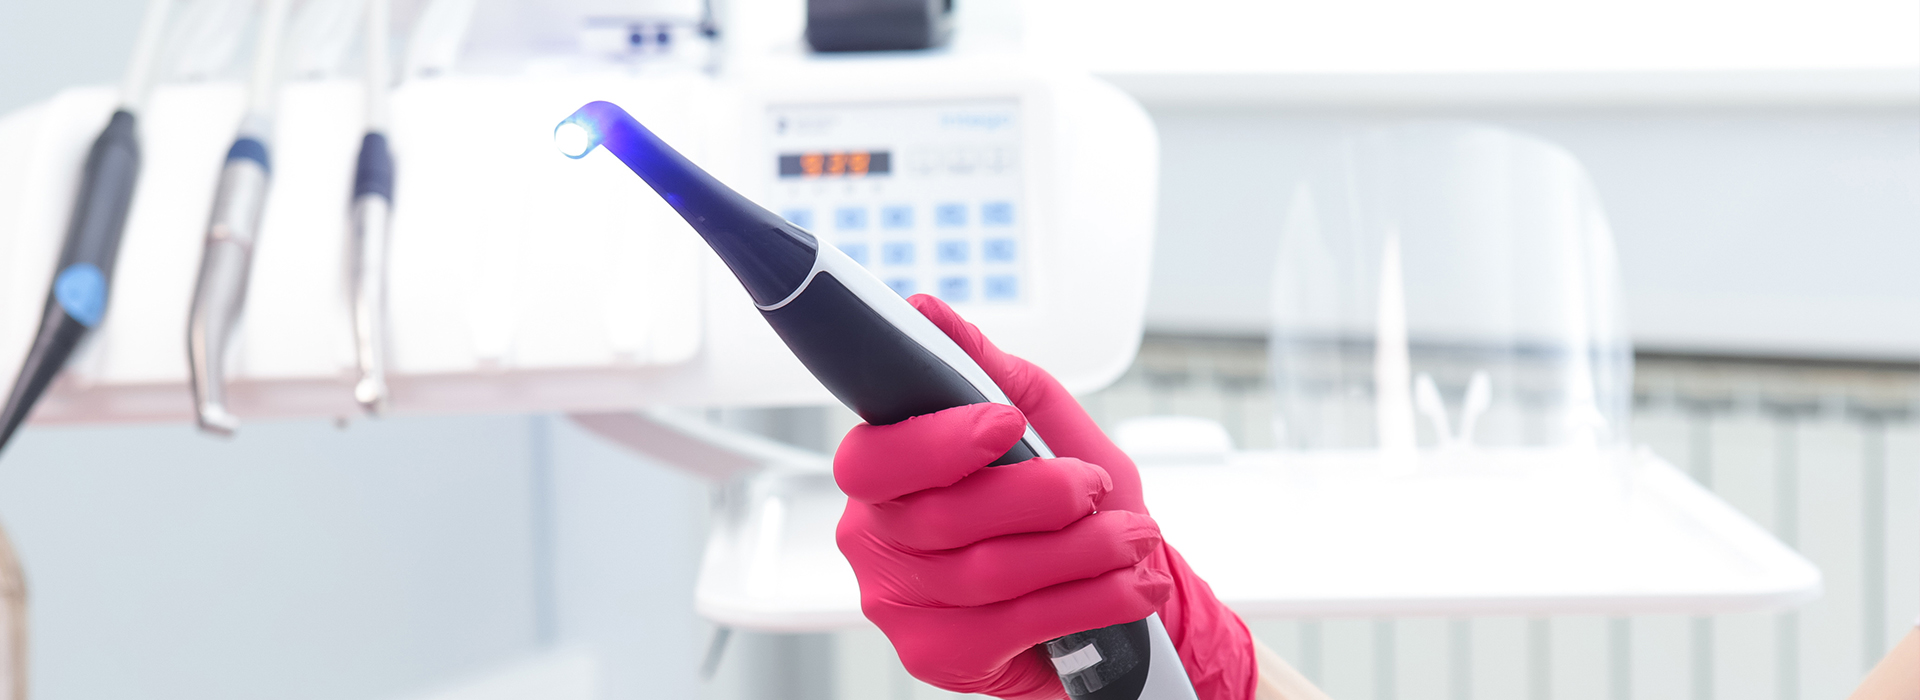 The image shows a person wearing pink gloves and holding a blue device, possibly an ultrasonic cleaning tool, in front of a white background with various items that could be laboratory equipment.